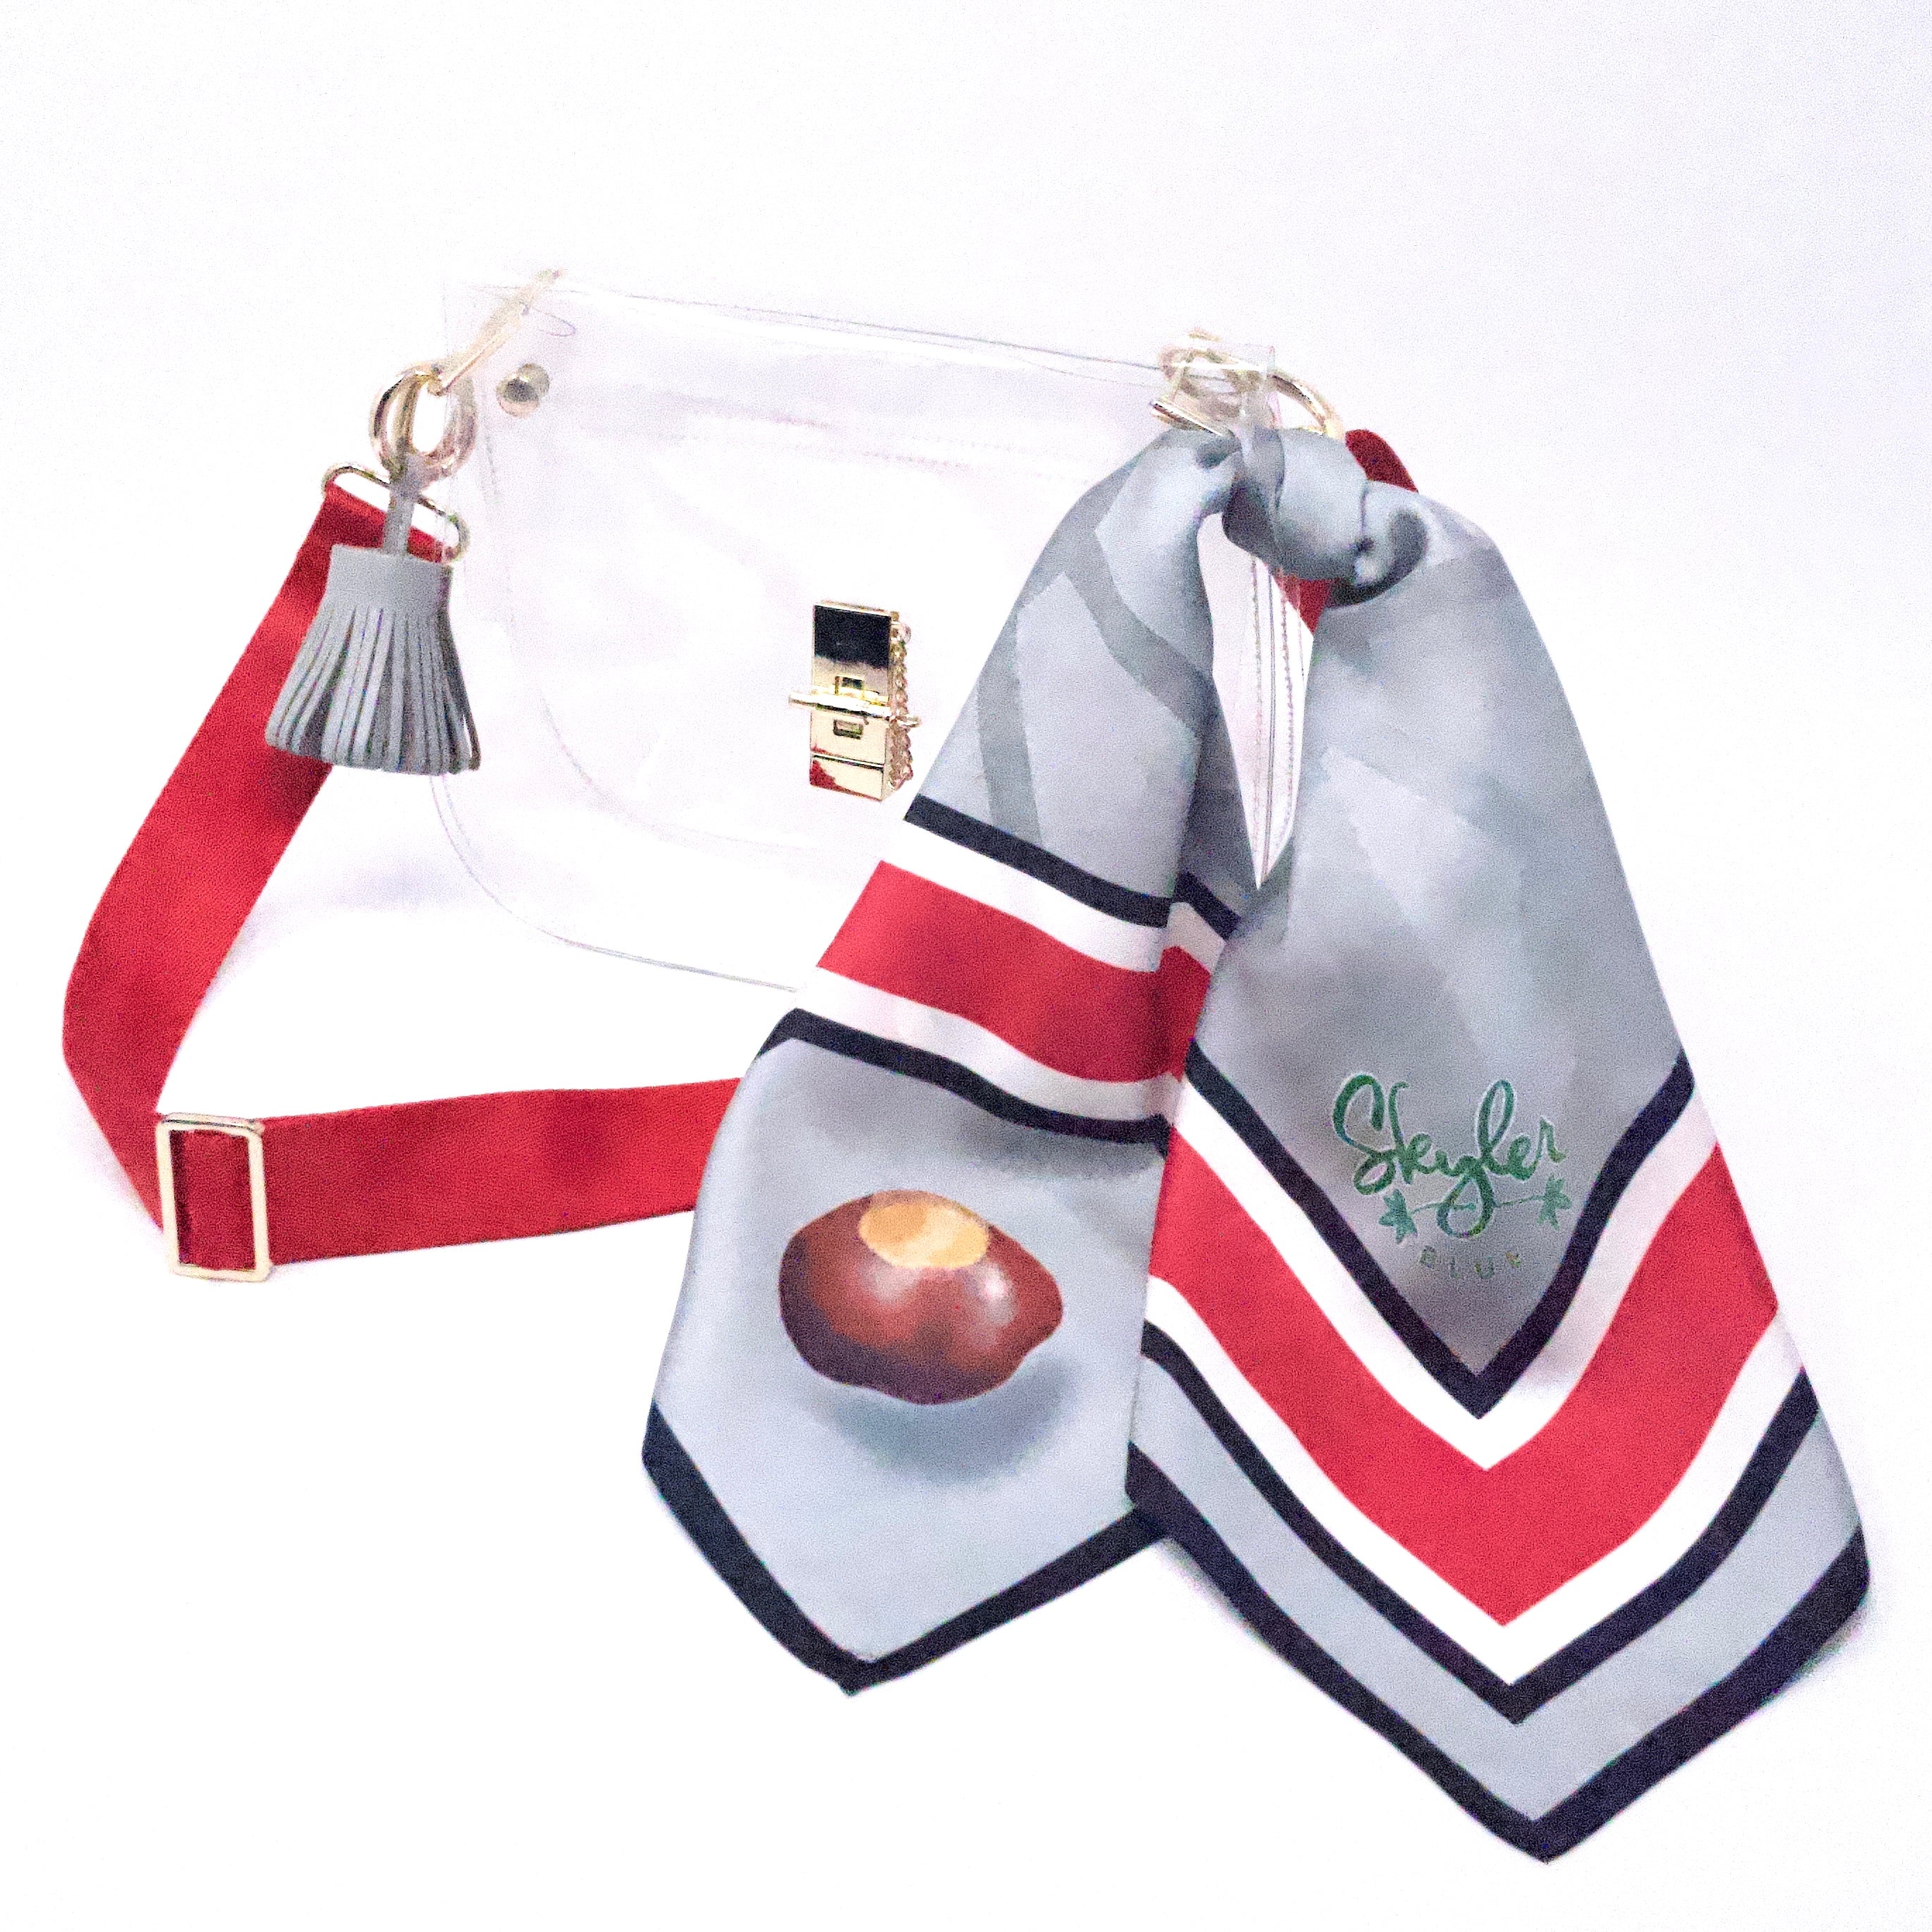 Skyler Blue’s The Columbus Medium Saddle Clear Bag stadium approved clear bag / clear purse including adjustable, nylon webbing shoulder or crossbody strap with herringbone weave and gold hardware, 60-centimeter 100% silk twill scarf, and 100% genuine leather tassel. 